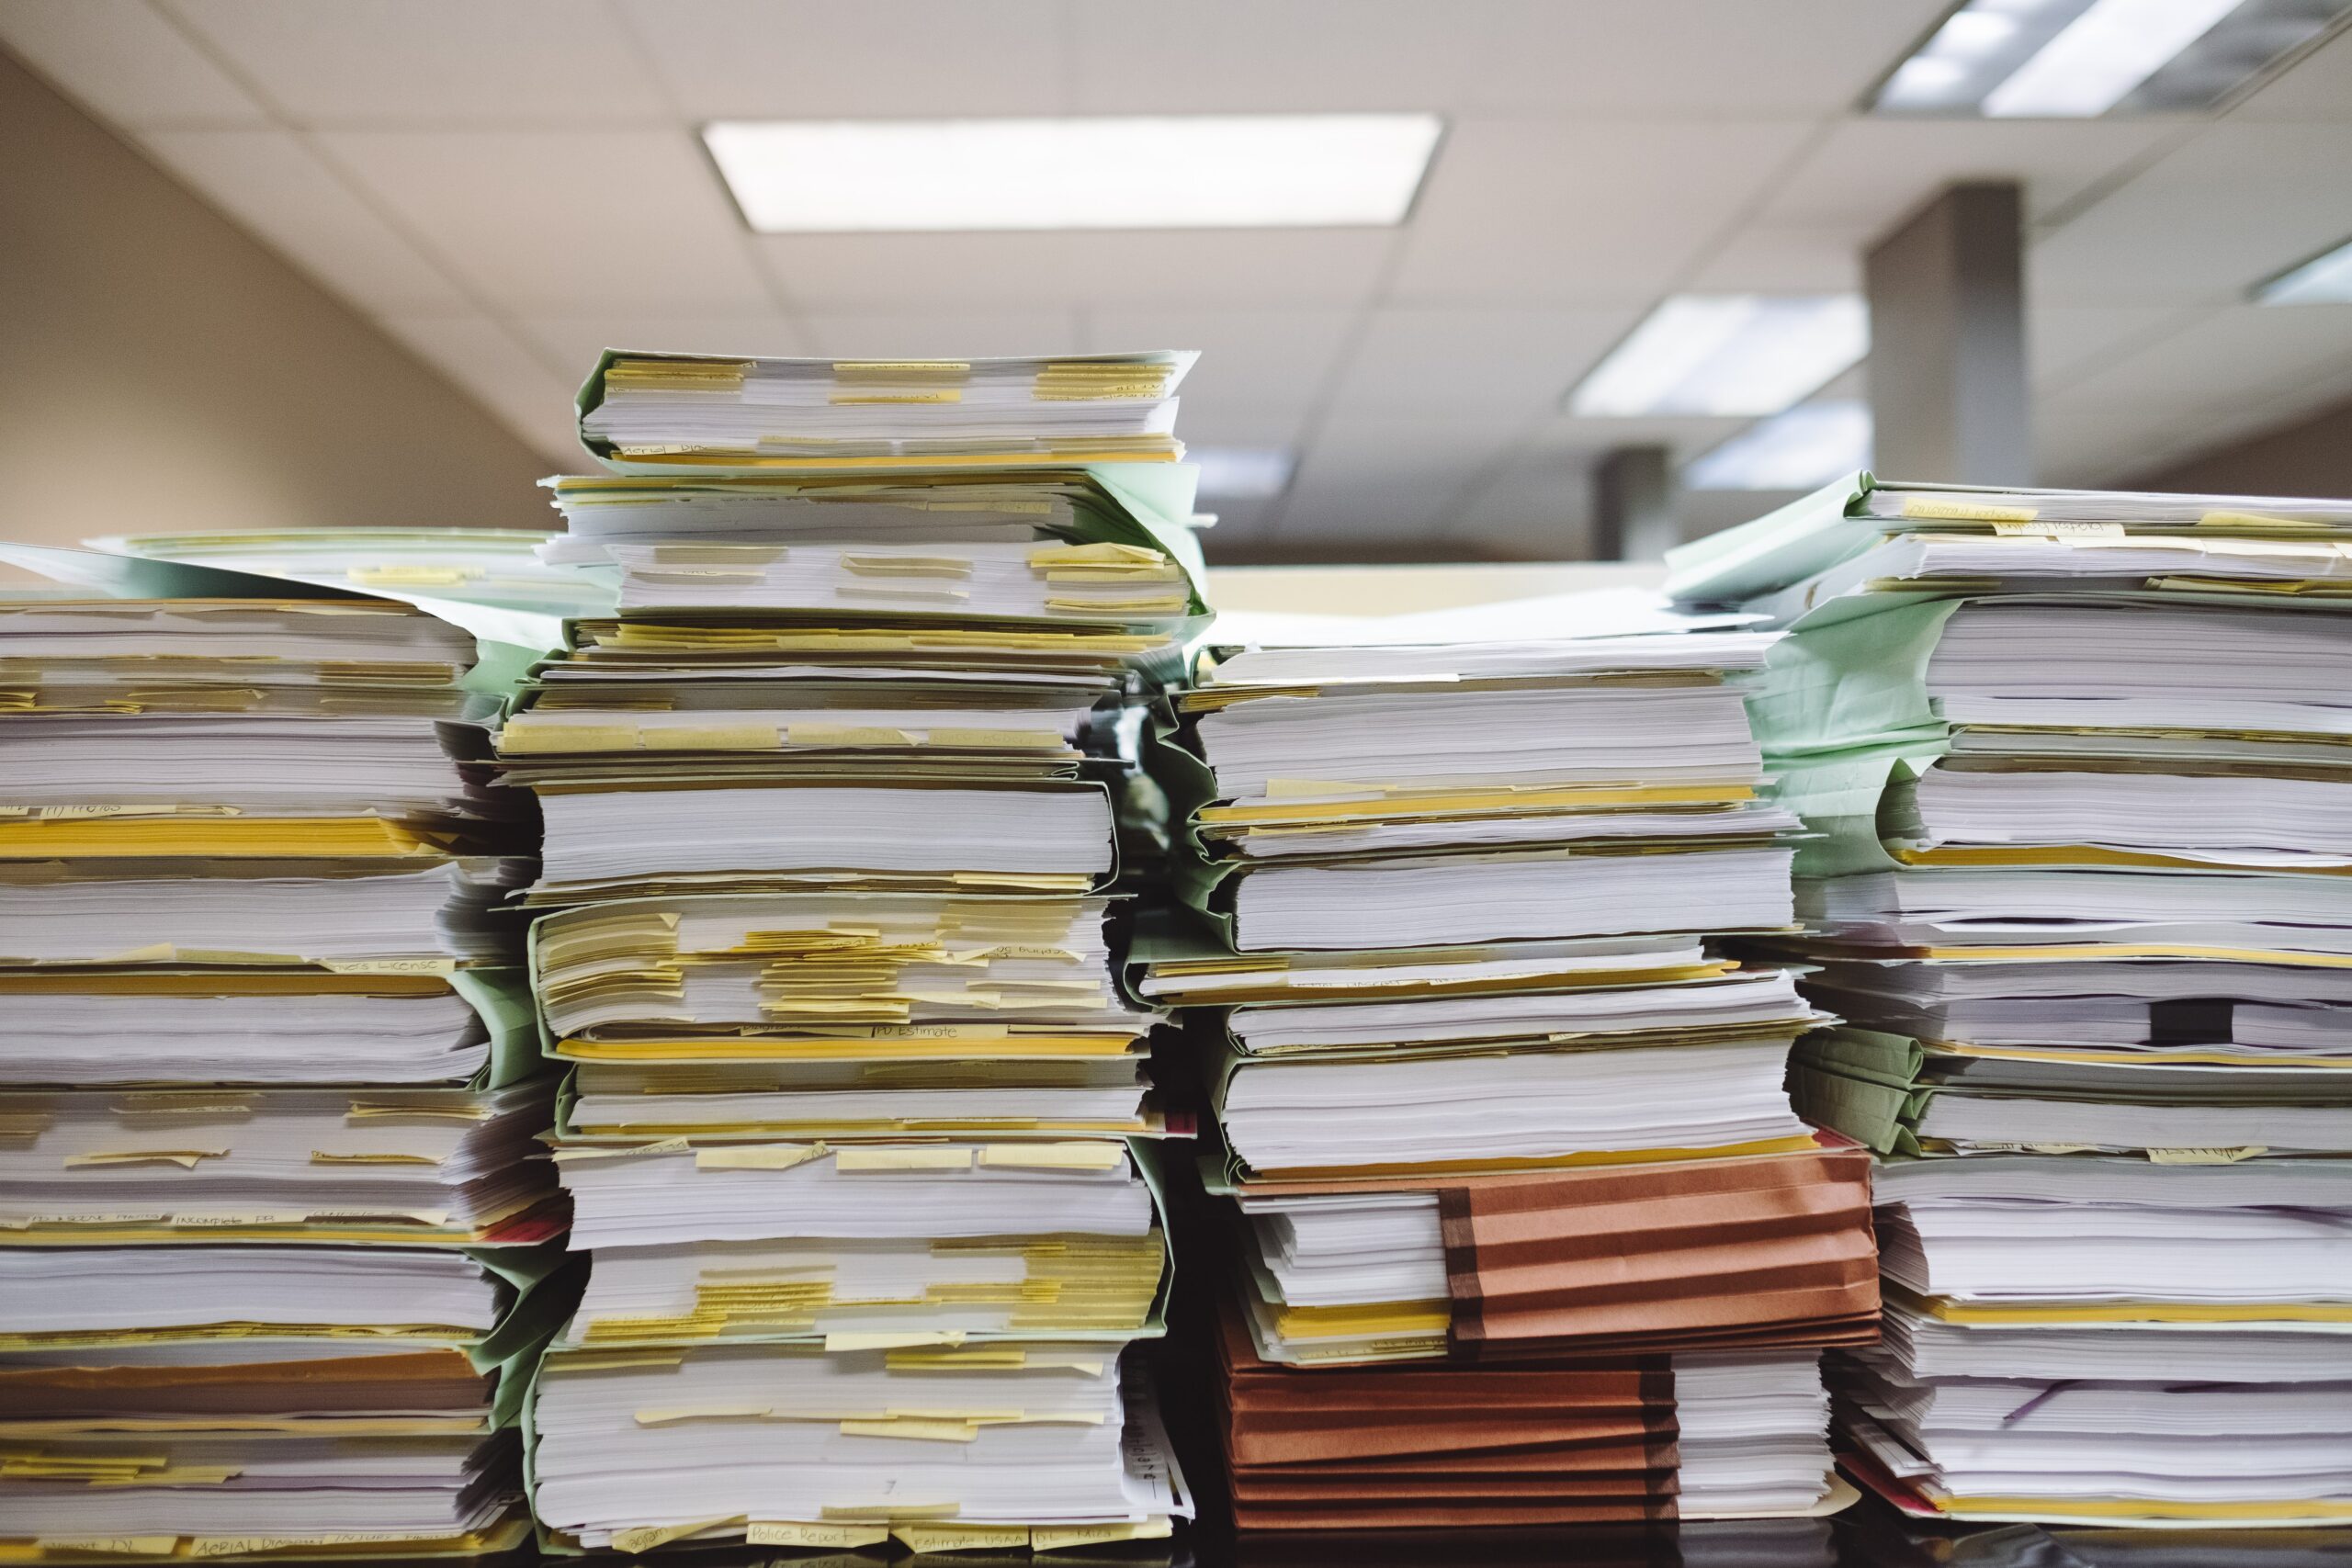 Large stacks of books and files on a table.